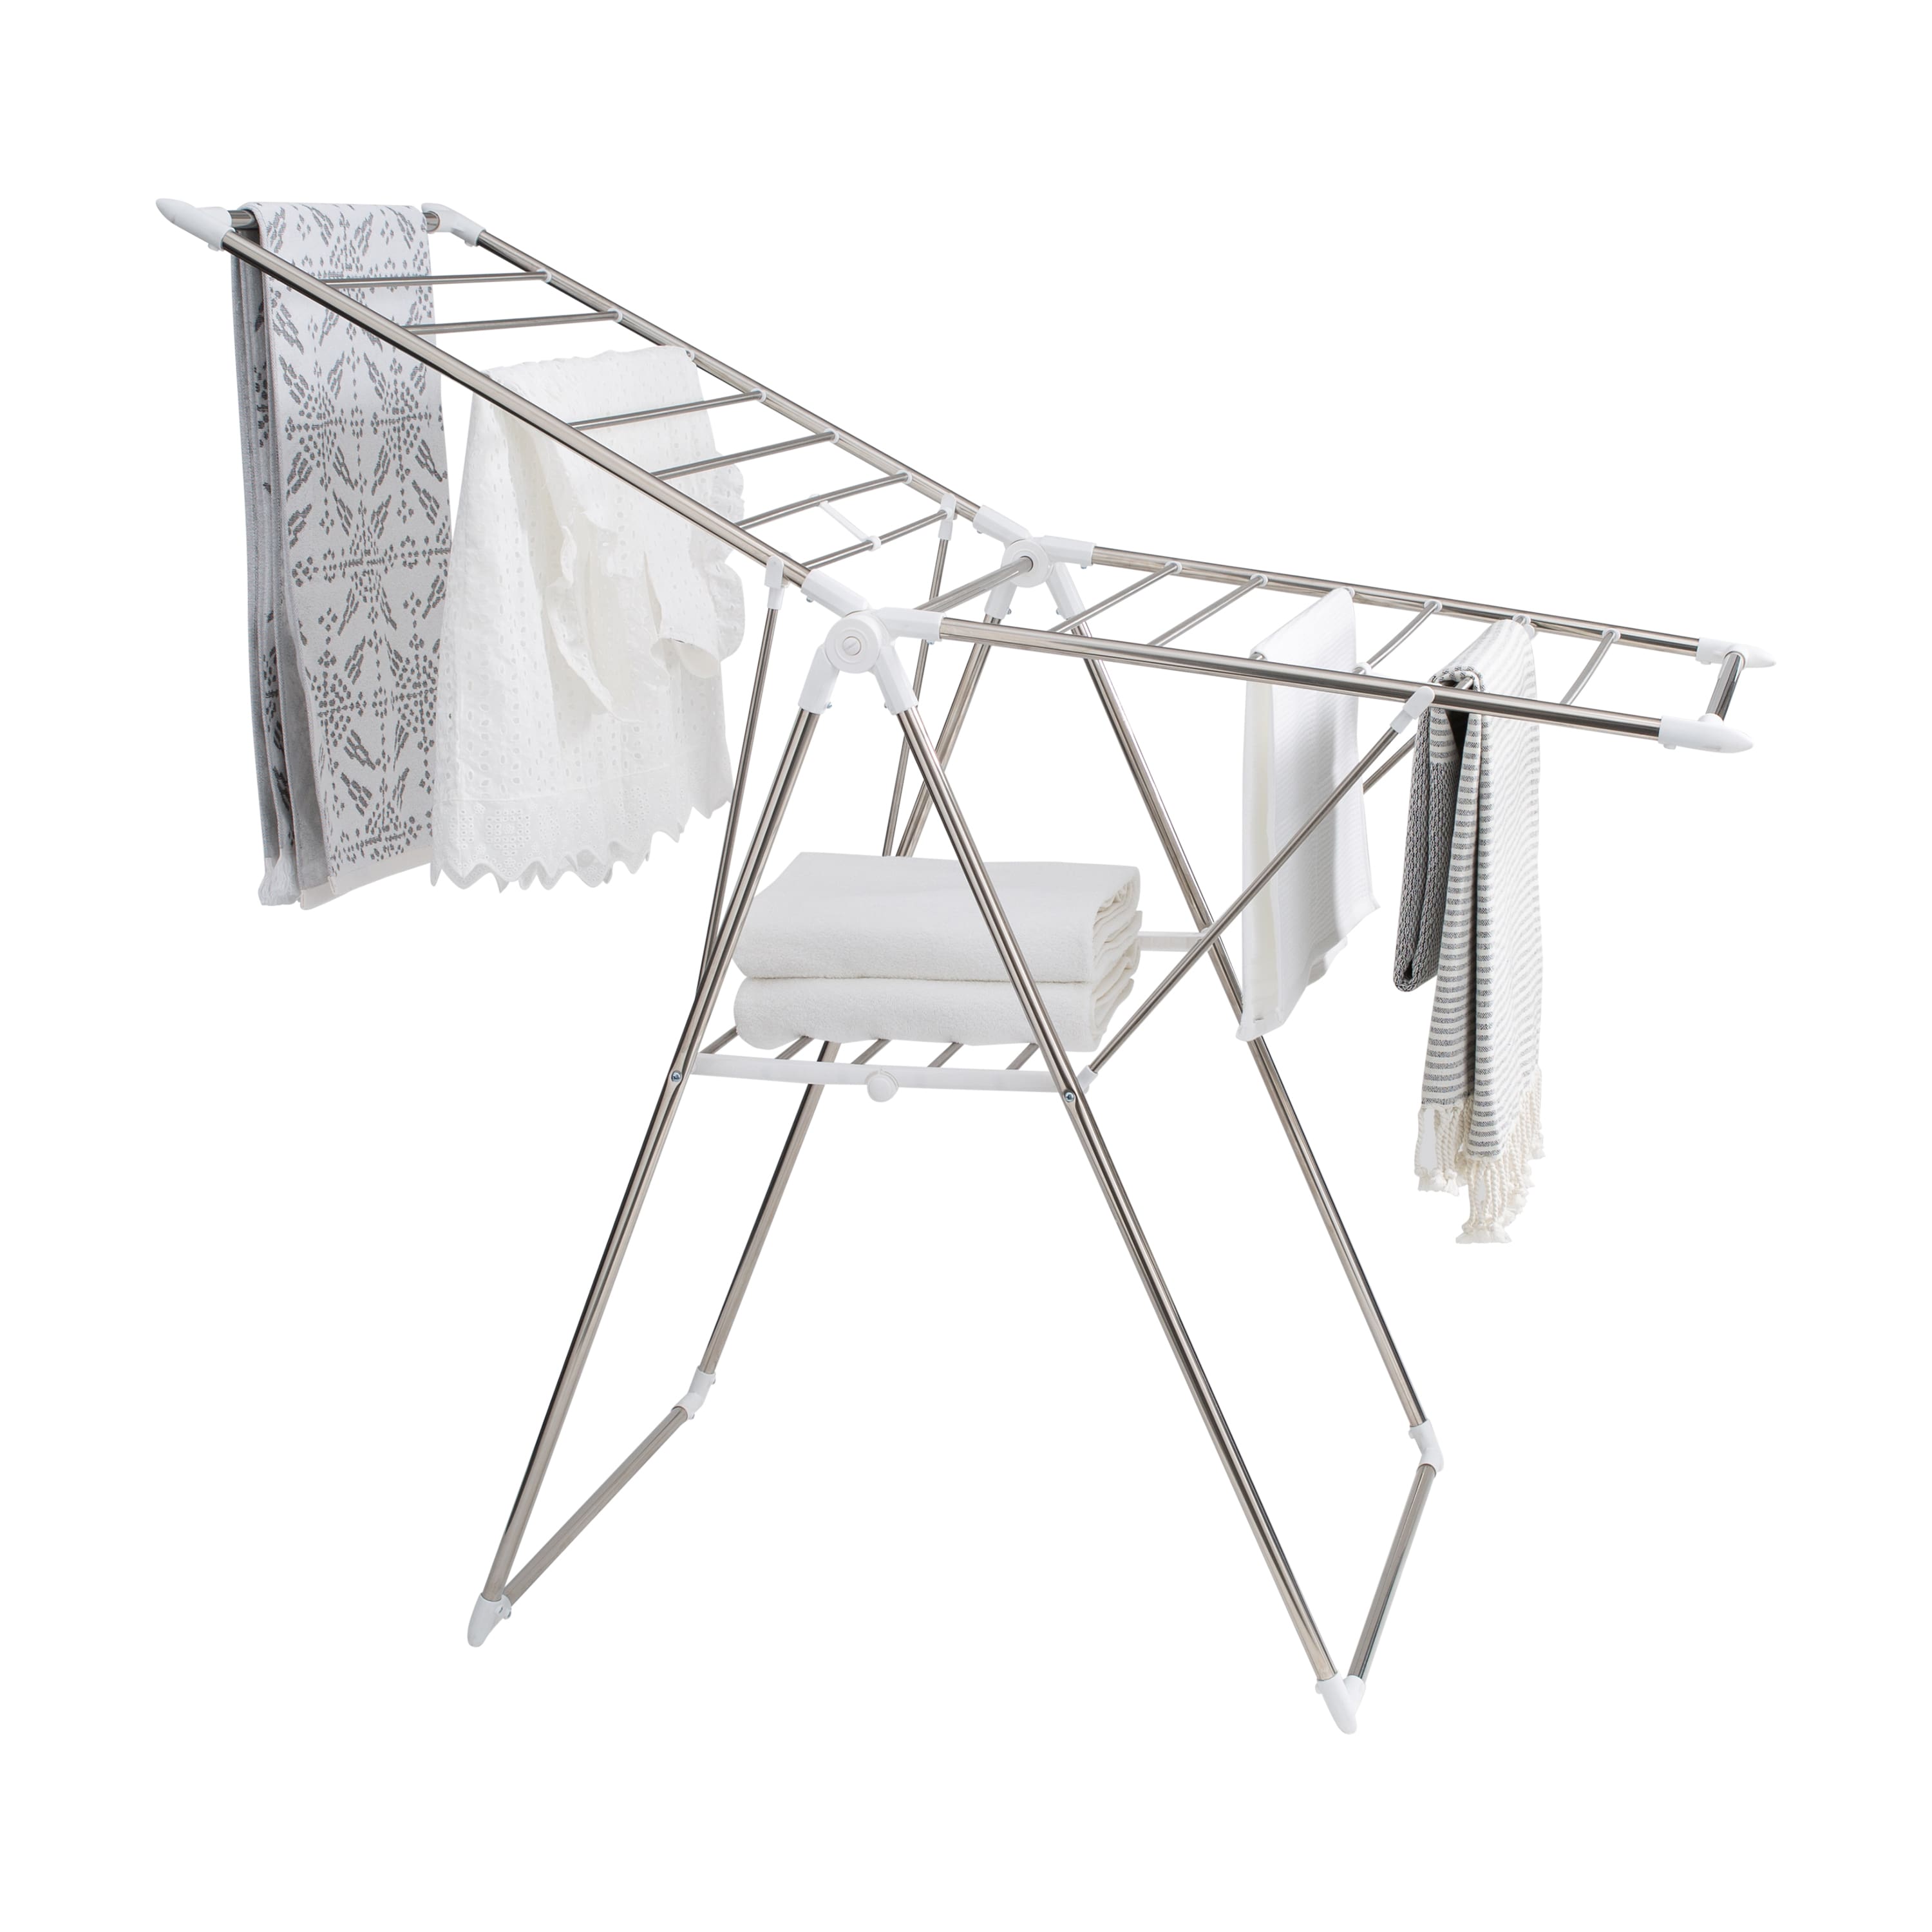 Organize It All Collapsible Drying Rack